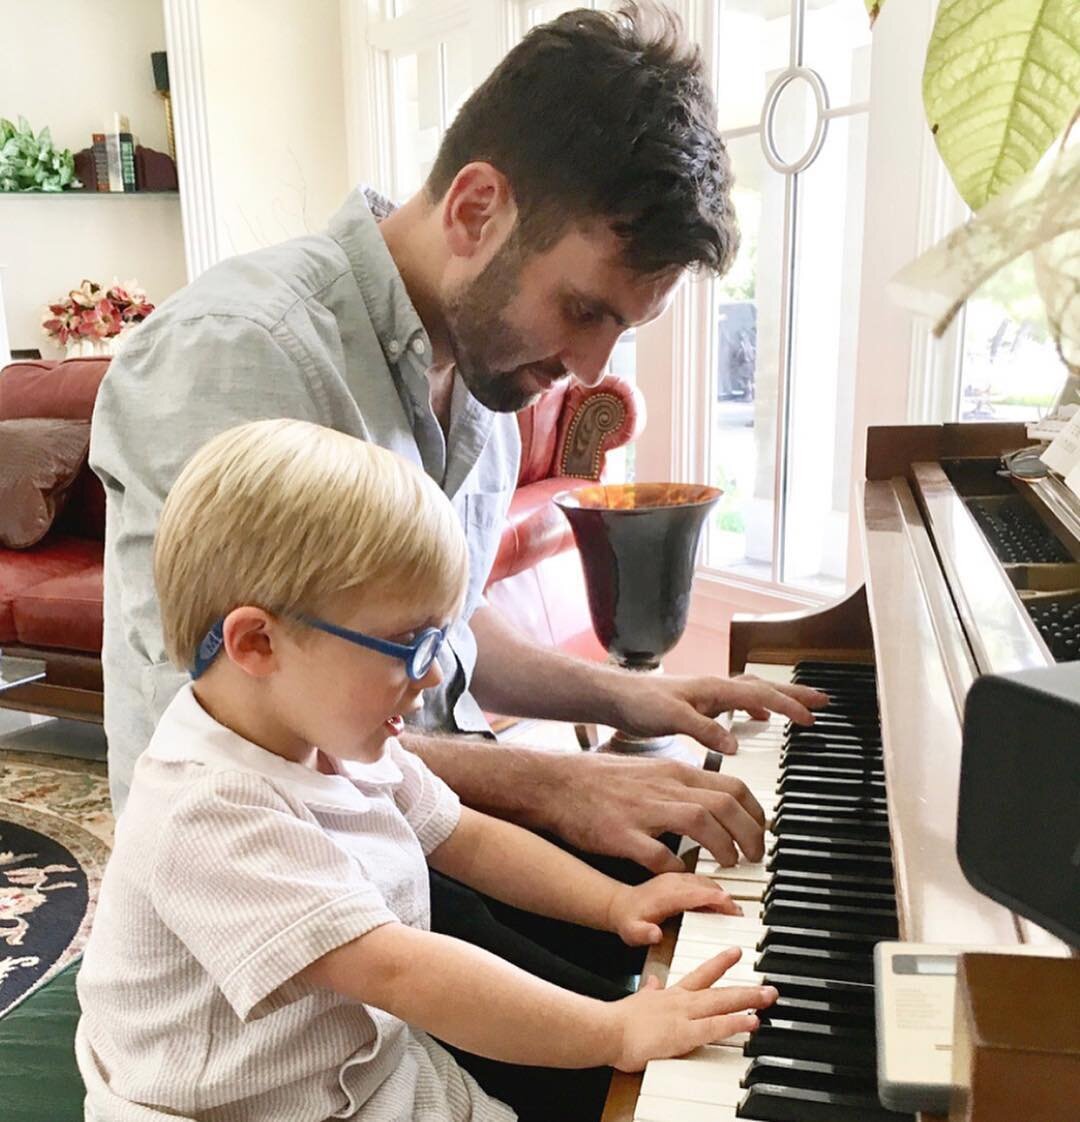 John Hayes and the Uncle Bubs dueling pianos world tour coming soon. Happy 4th Birthday week to my main man/future astronaut/fellow cupcake enthusiast.